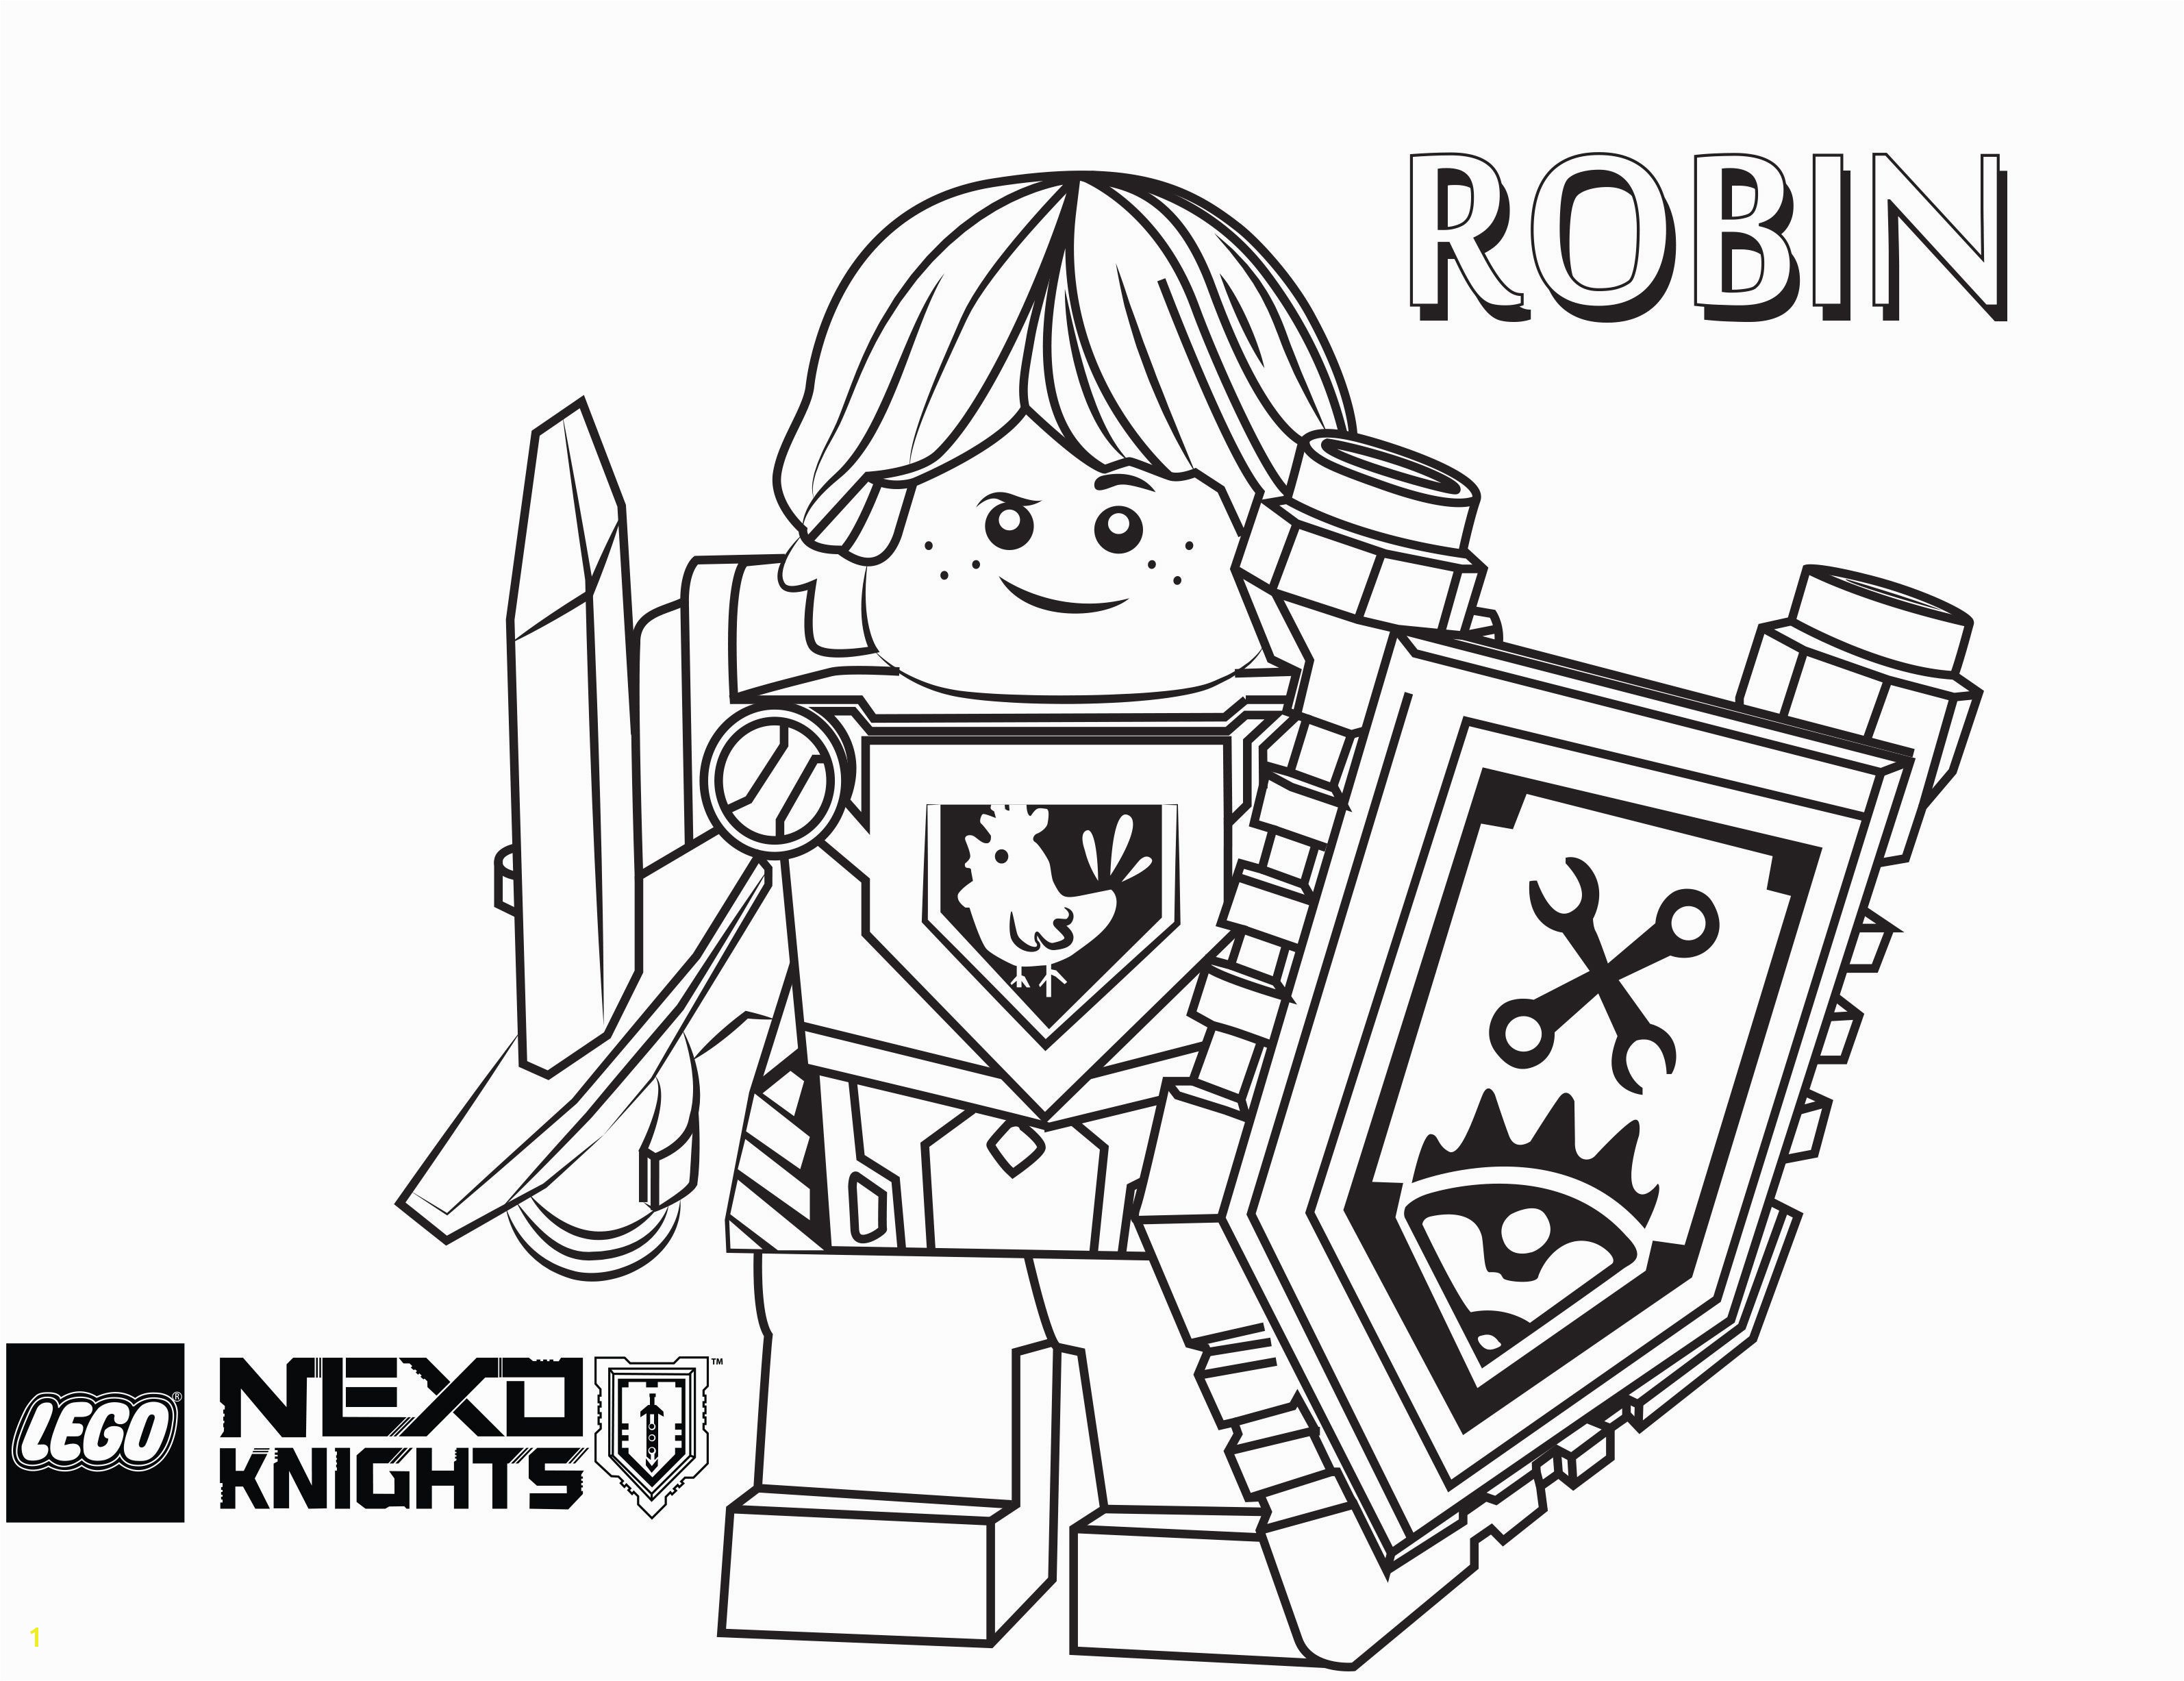 LEGO Nexo Knights Coloring Pages Free Printable LEGO Nexo Knights Color Sheets